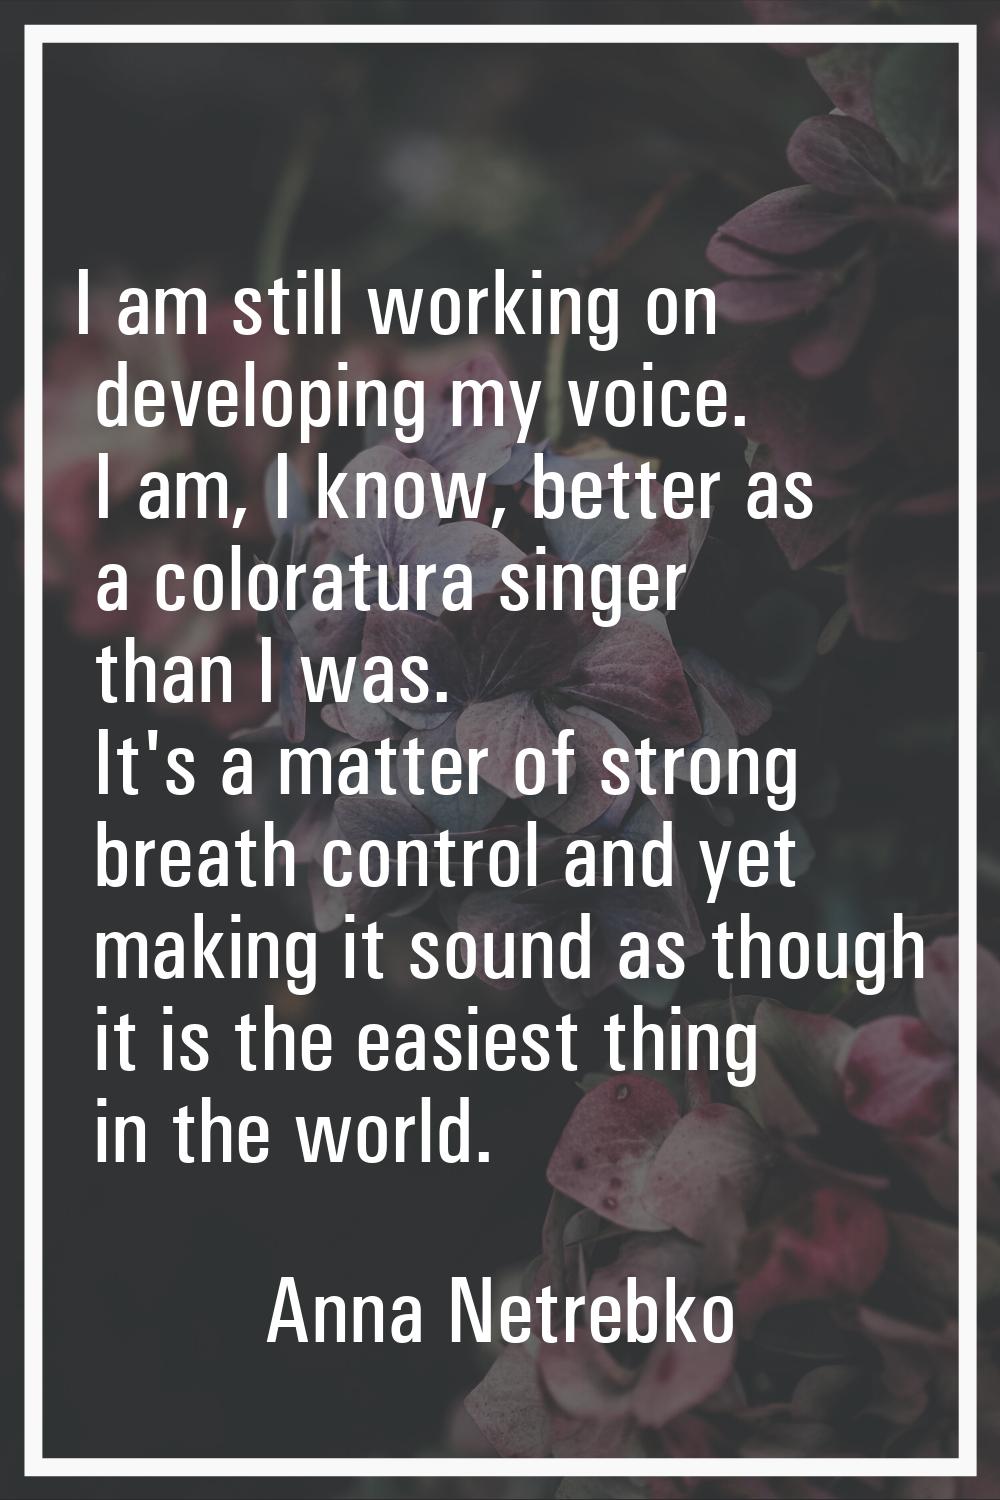 I am still working on developing my voice. I am, I know, better as a coloratura singer than I was. 